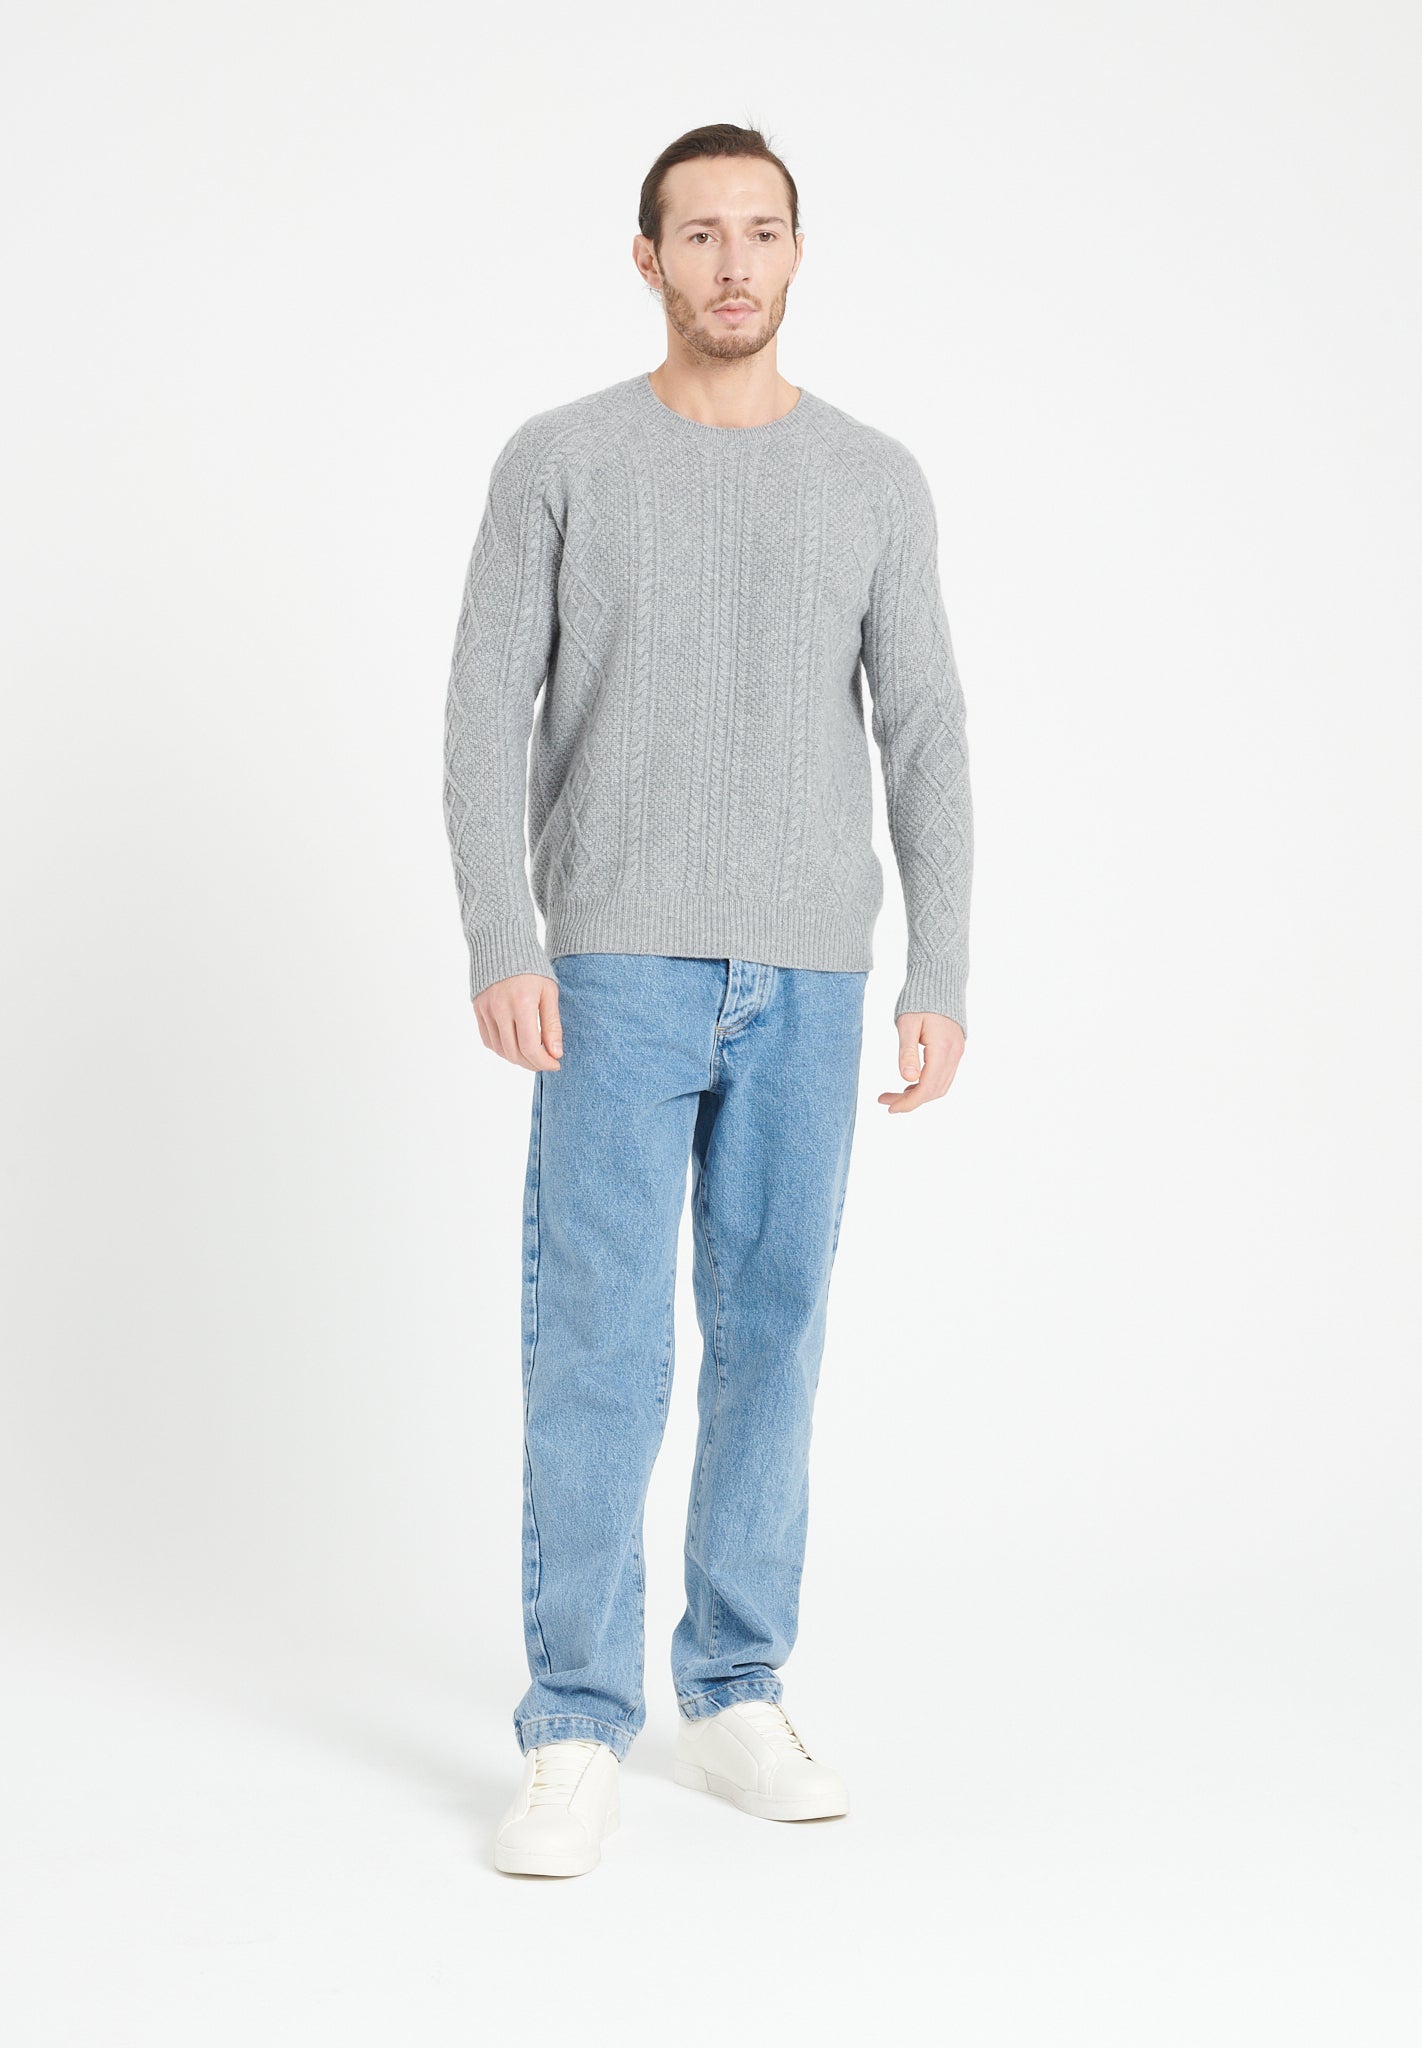 Pure Cashmere 6 ply Round Neck Sweater w/Cable Knit (Zach 1)